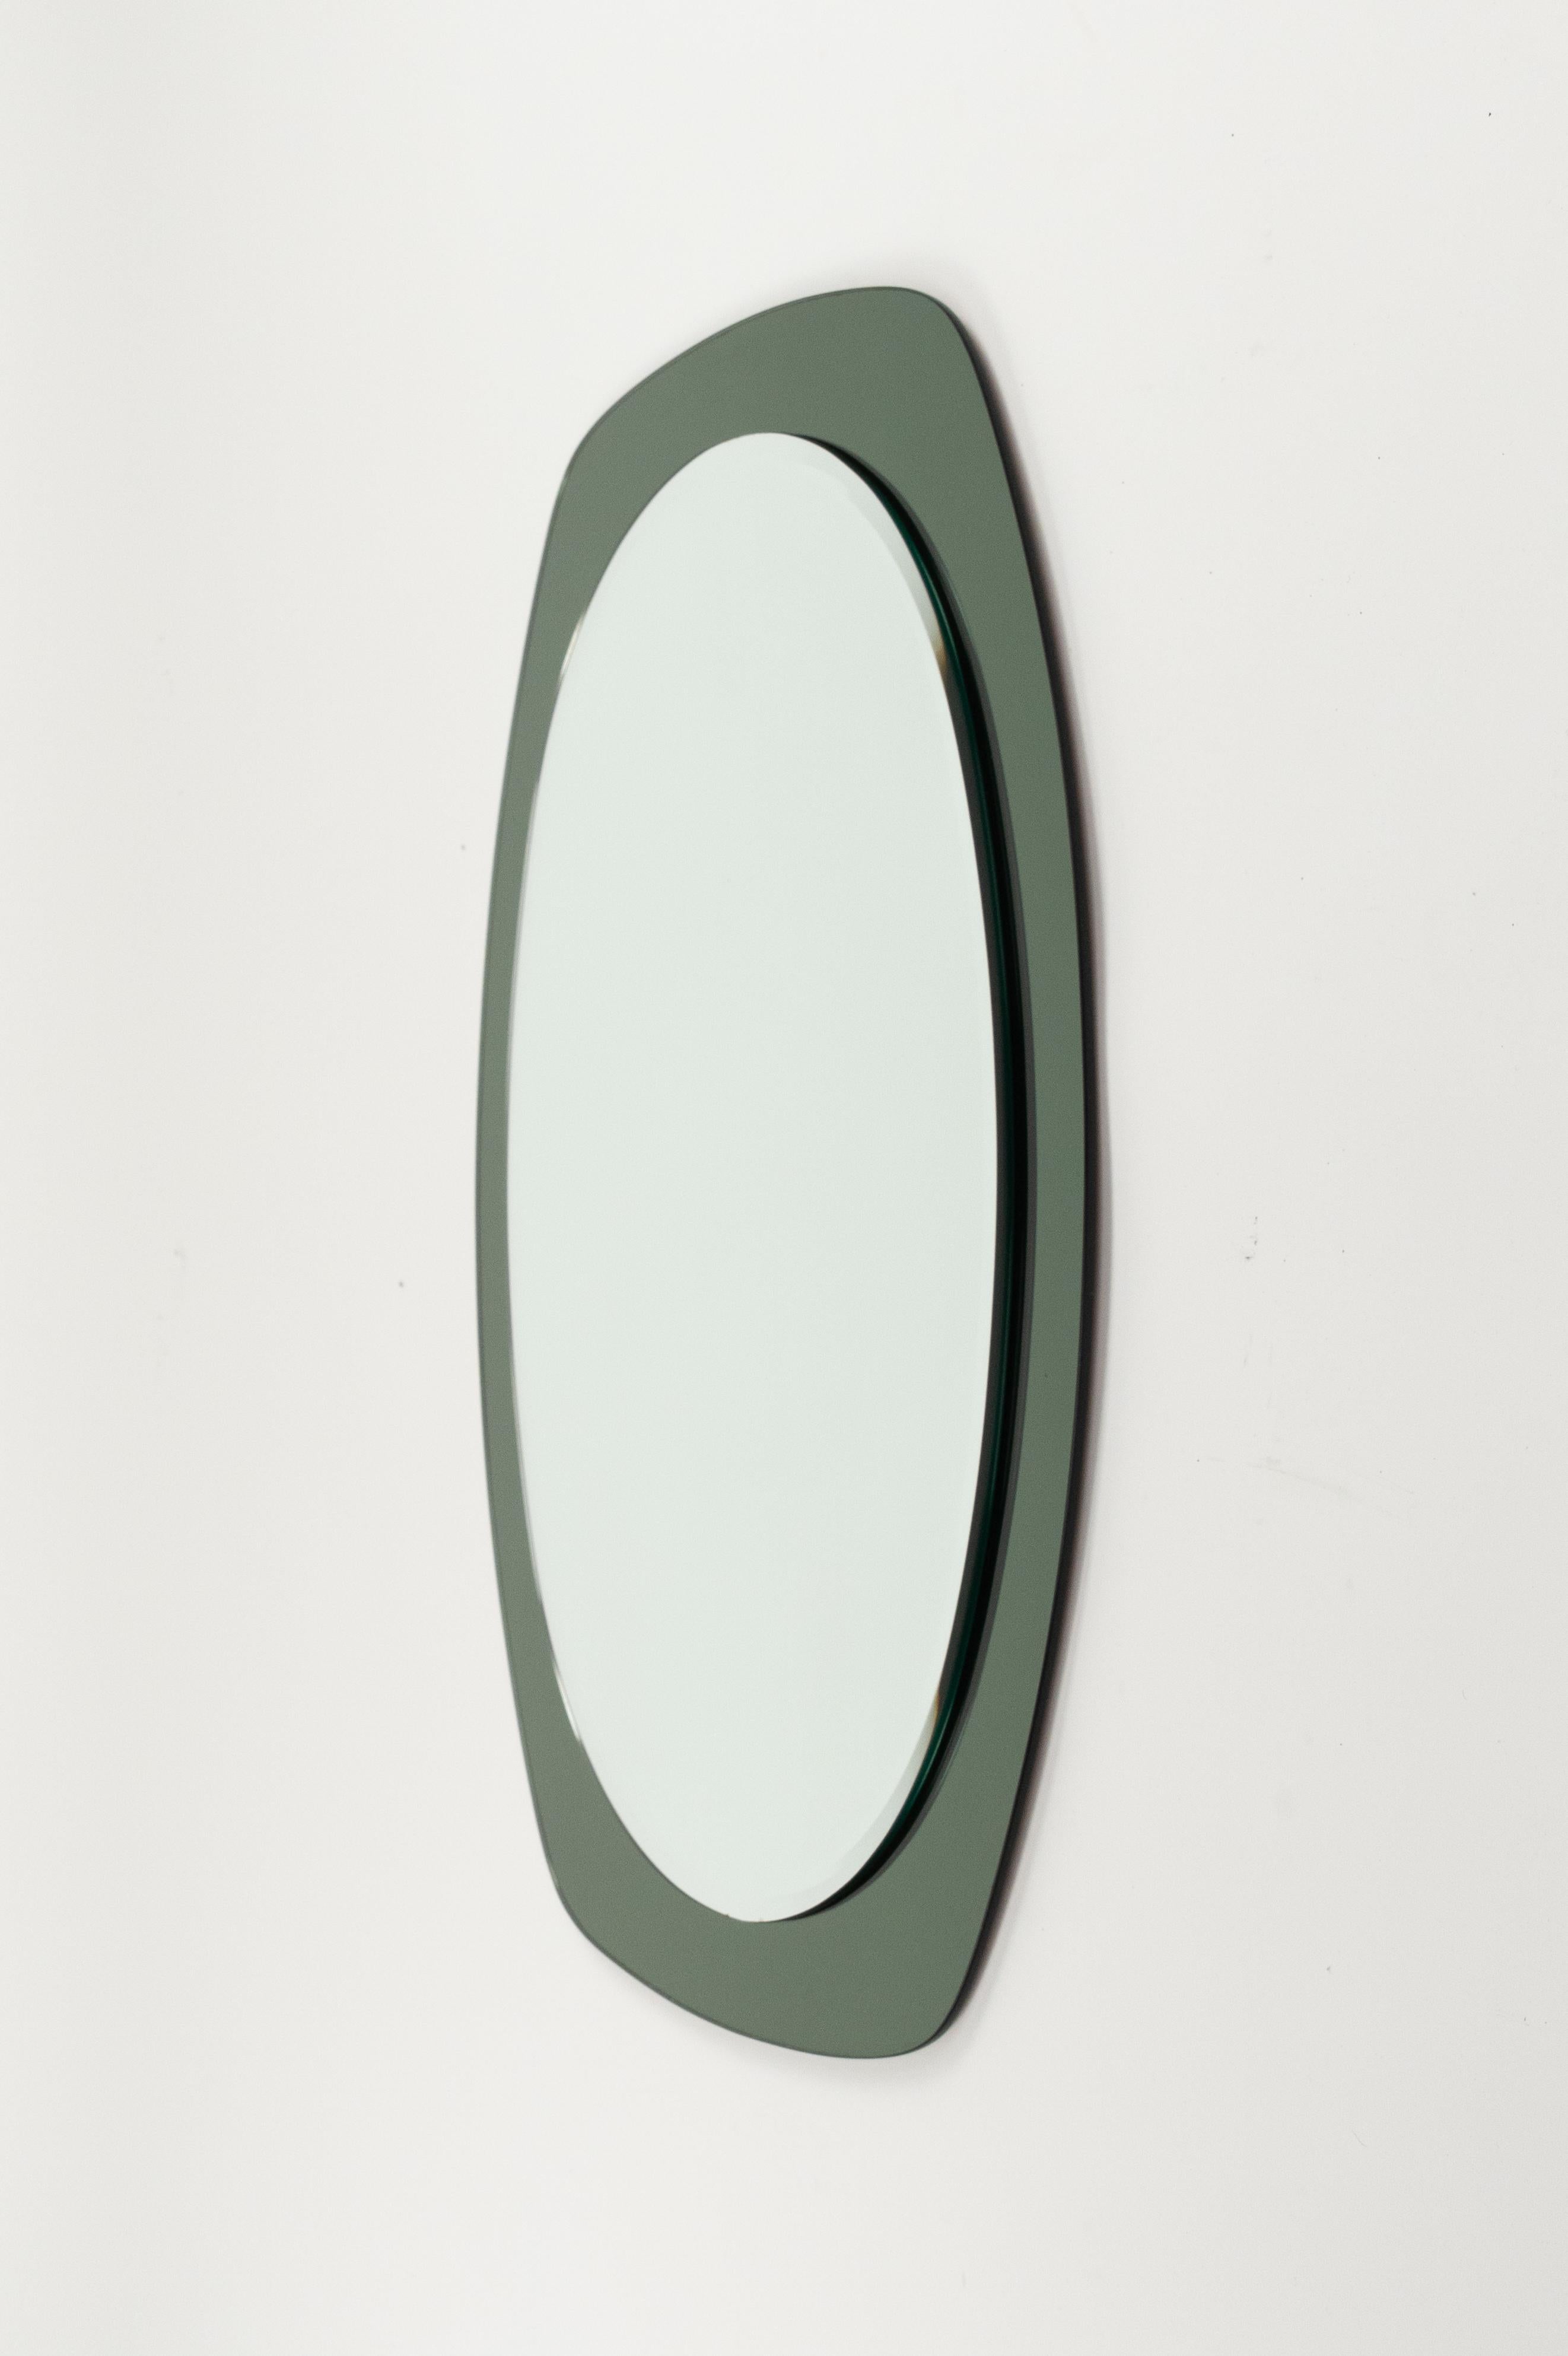 Italian Midcentury Cristal Art Oval Wall Mirror with Green Frame, Italy 1960s For Sale